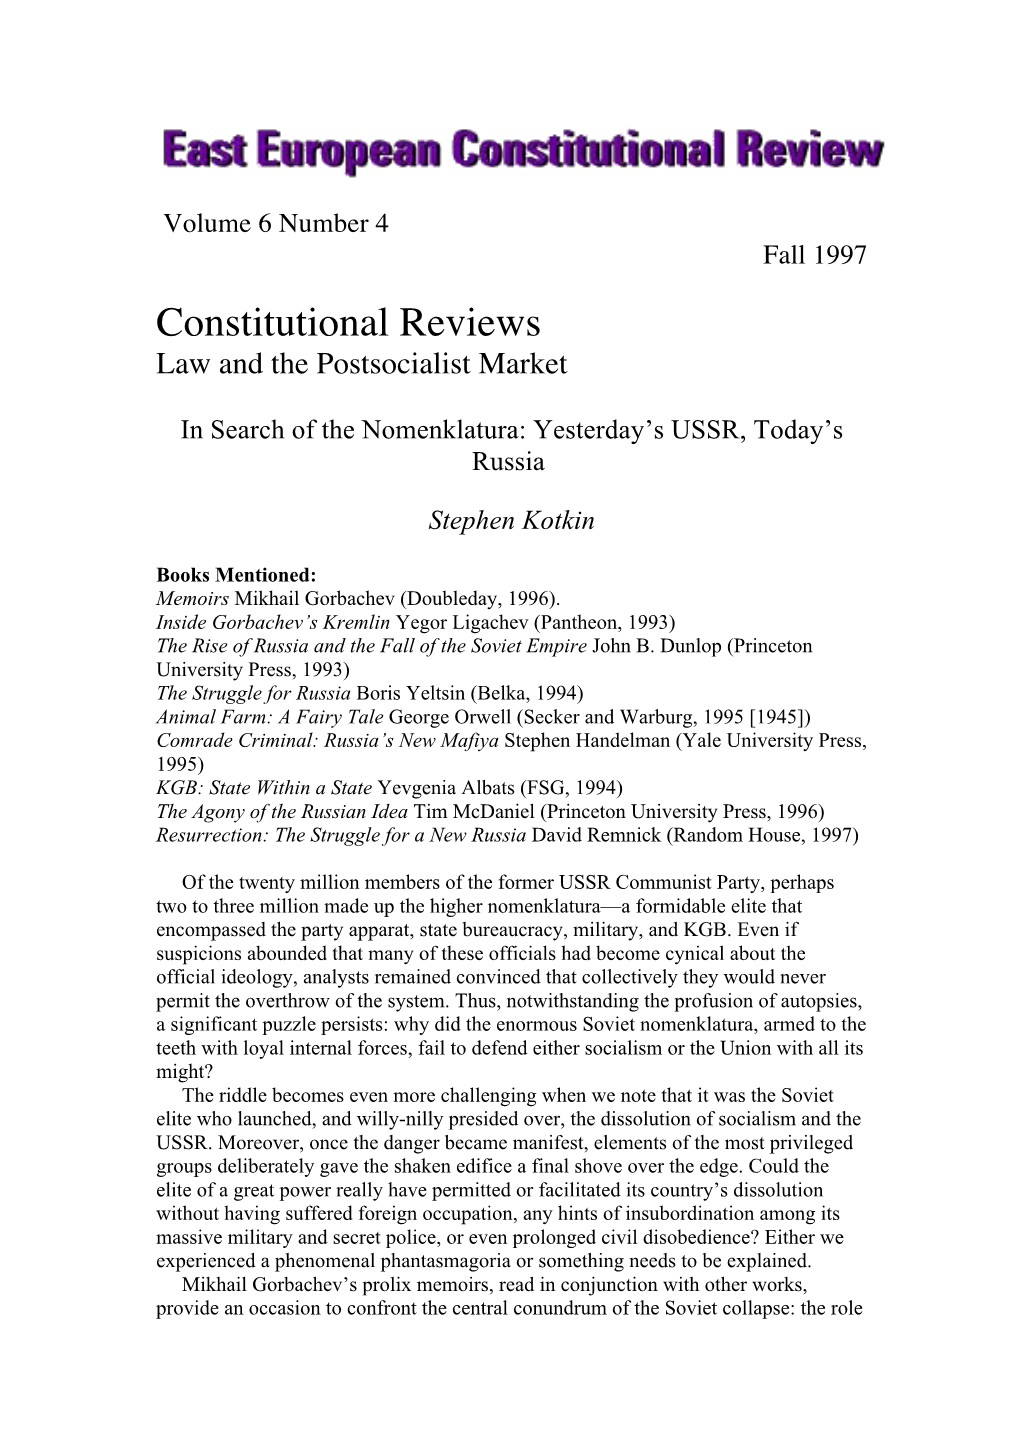 Constitutional Reviews� Law and the Postsocialist Market